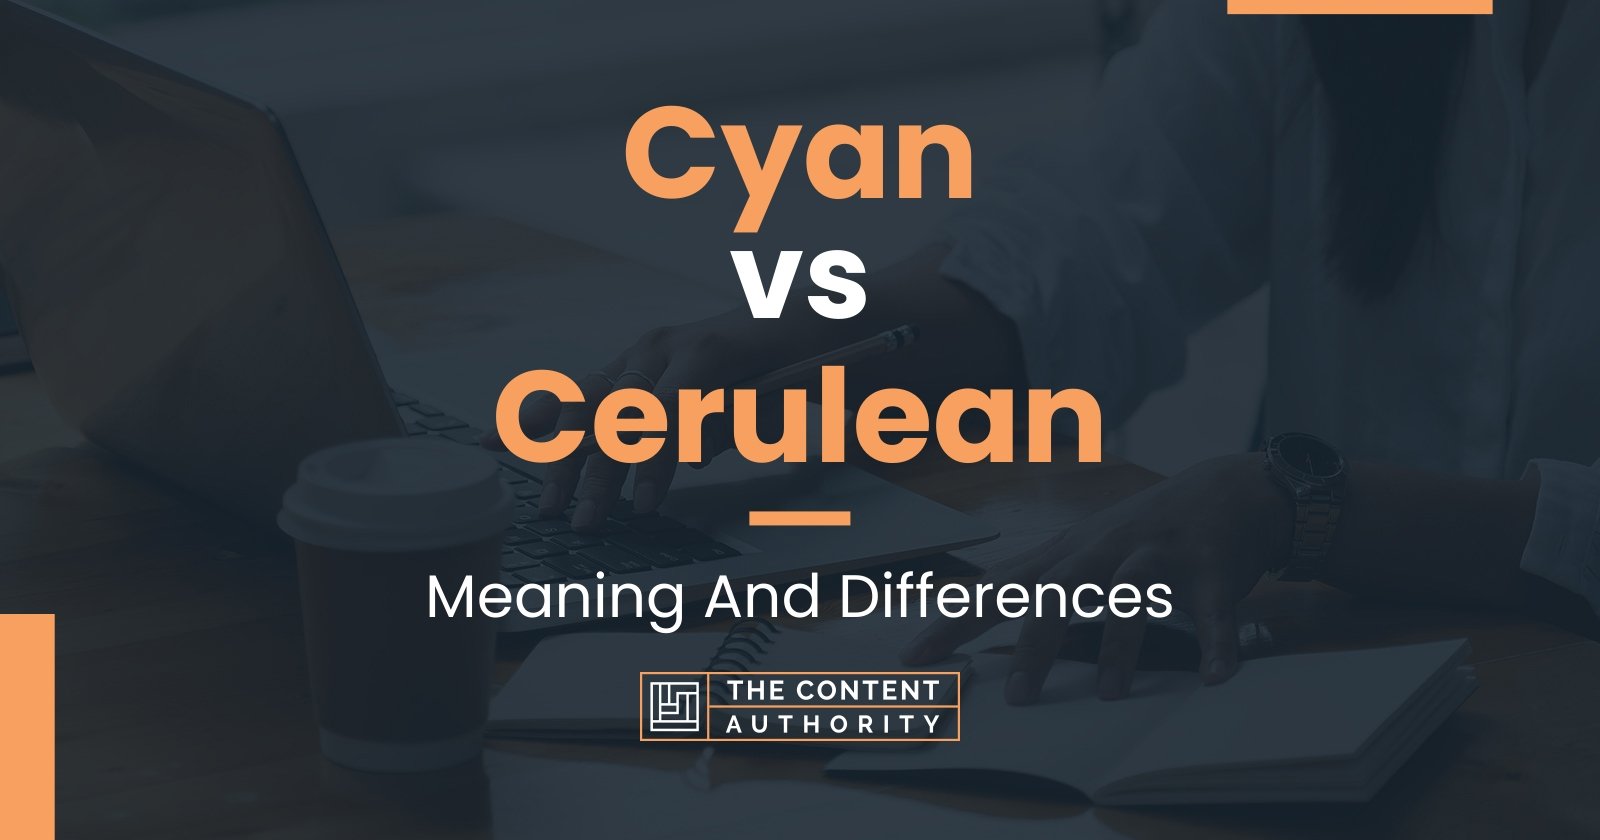 Cyan vs Cerulean: Meaning And Differences